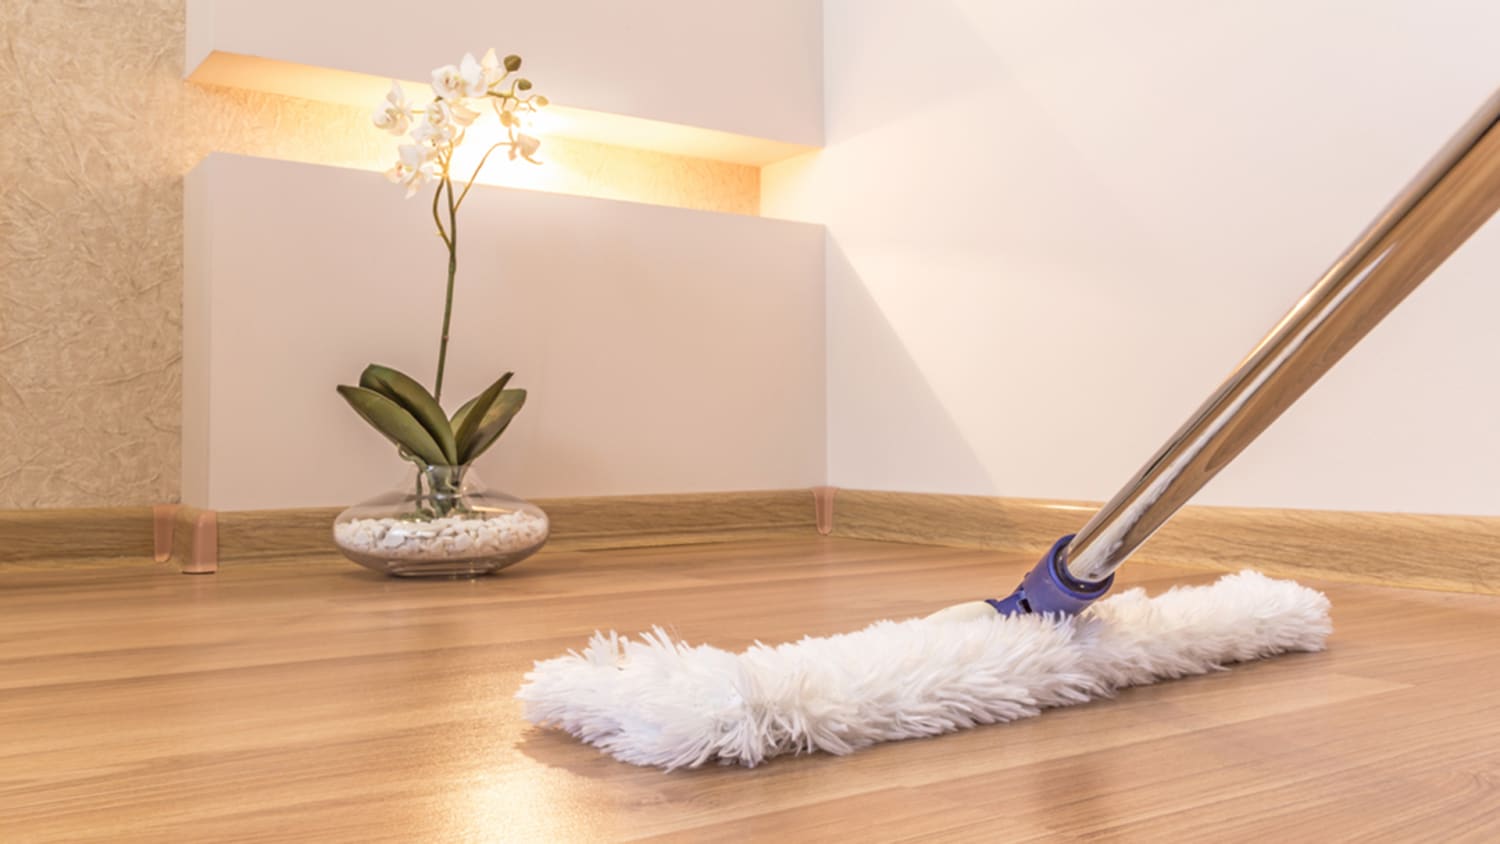 How To Clean Hardwood Floors The Right Way, What To Use Clean Engineered Hardwood Floors